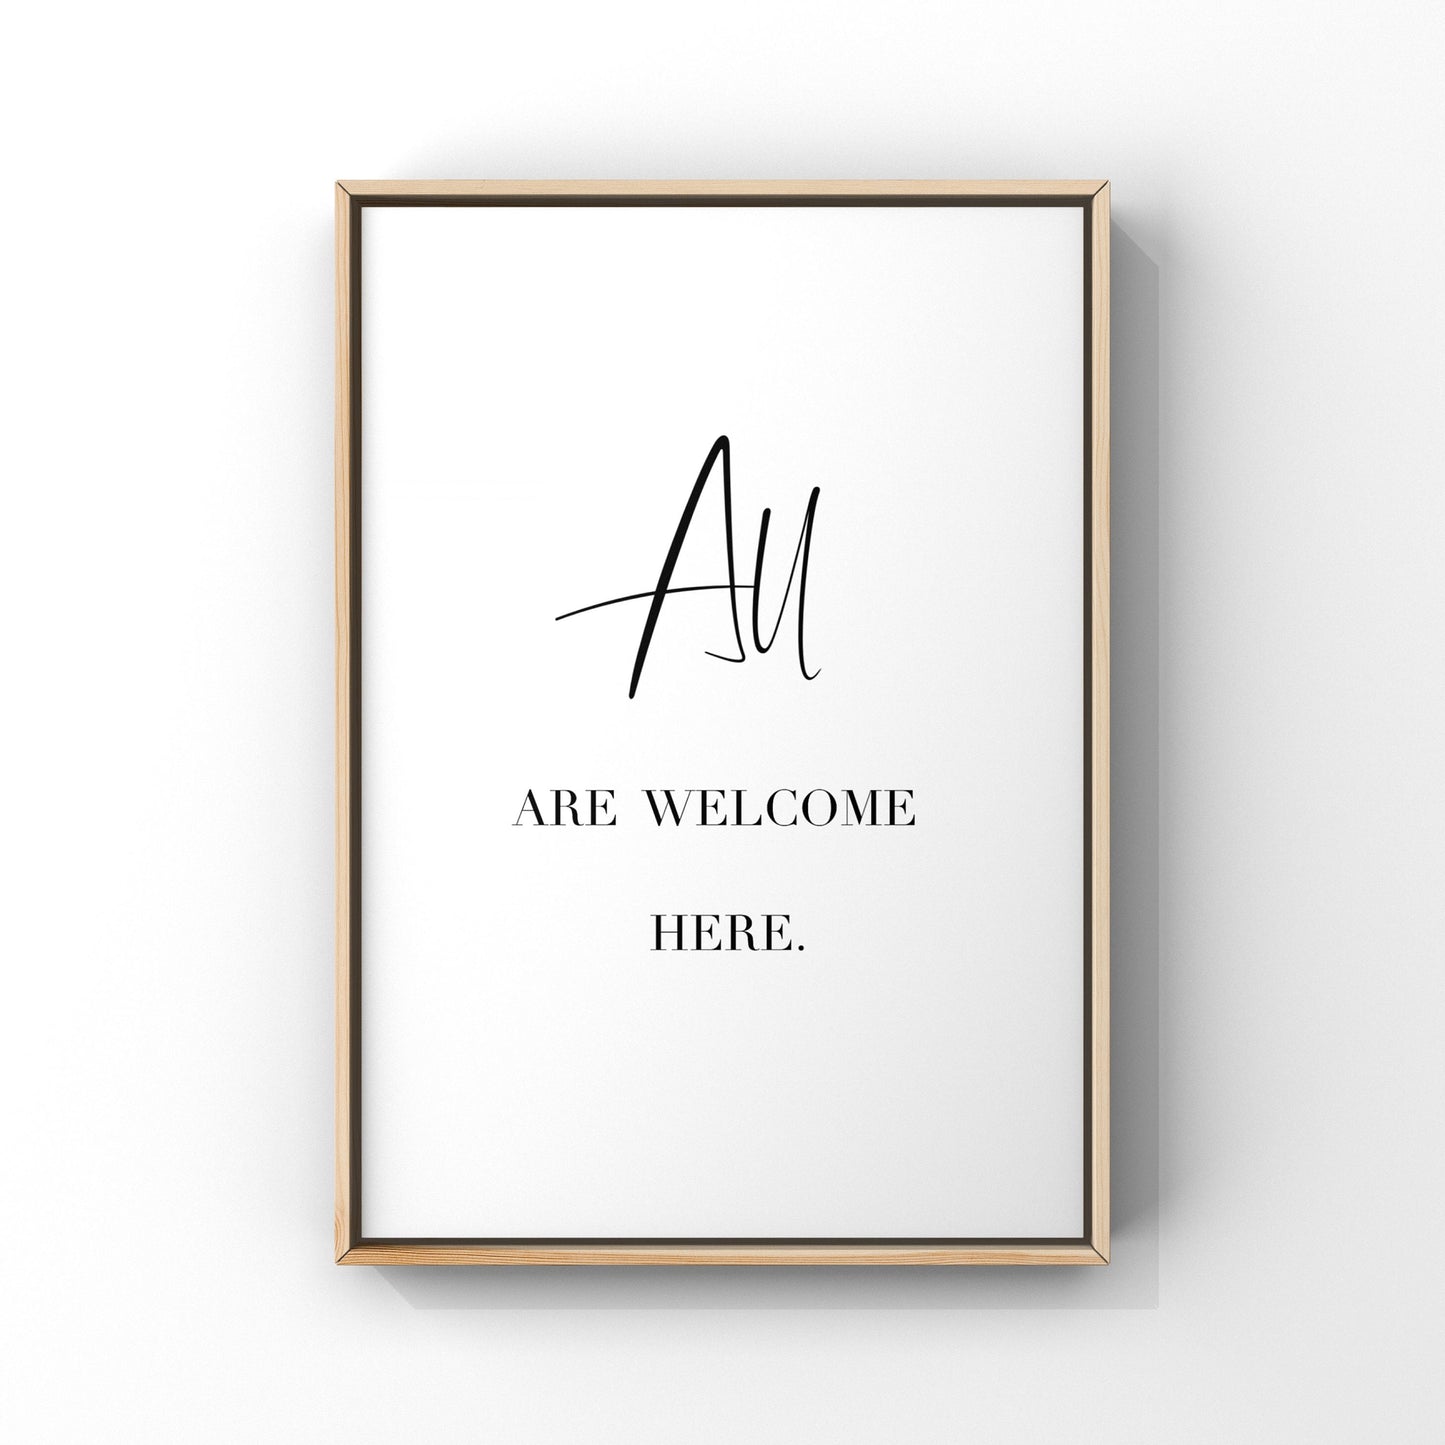 All are welcome here, All are welcome here sign,All are welcome here poster,Guest Bedroom Decor,Home Wall Decor,Living Room Art,Entryway Art